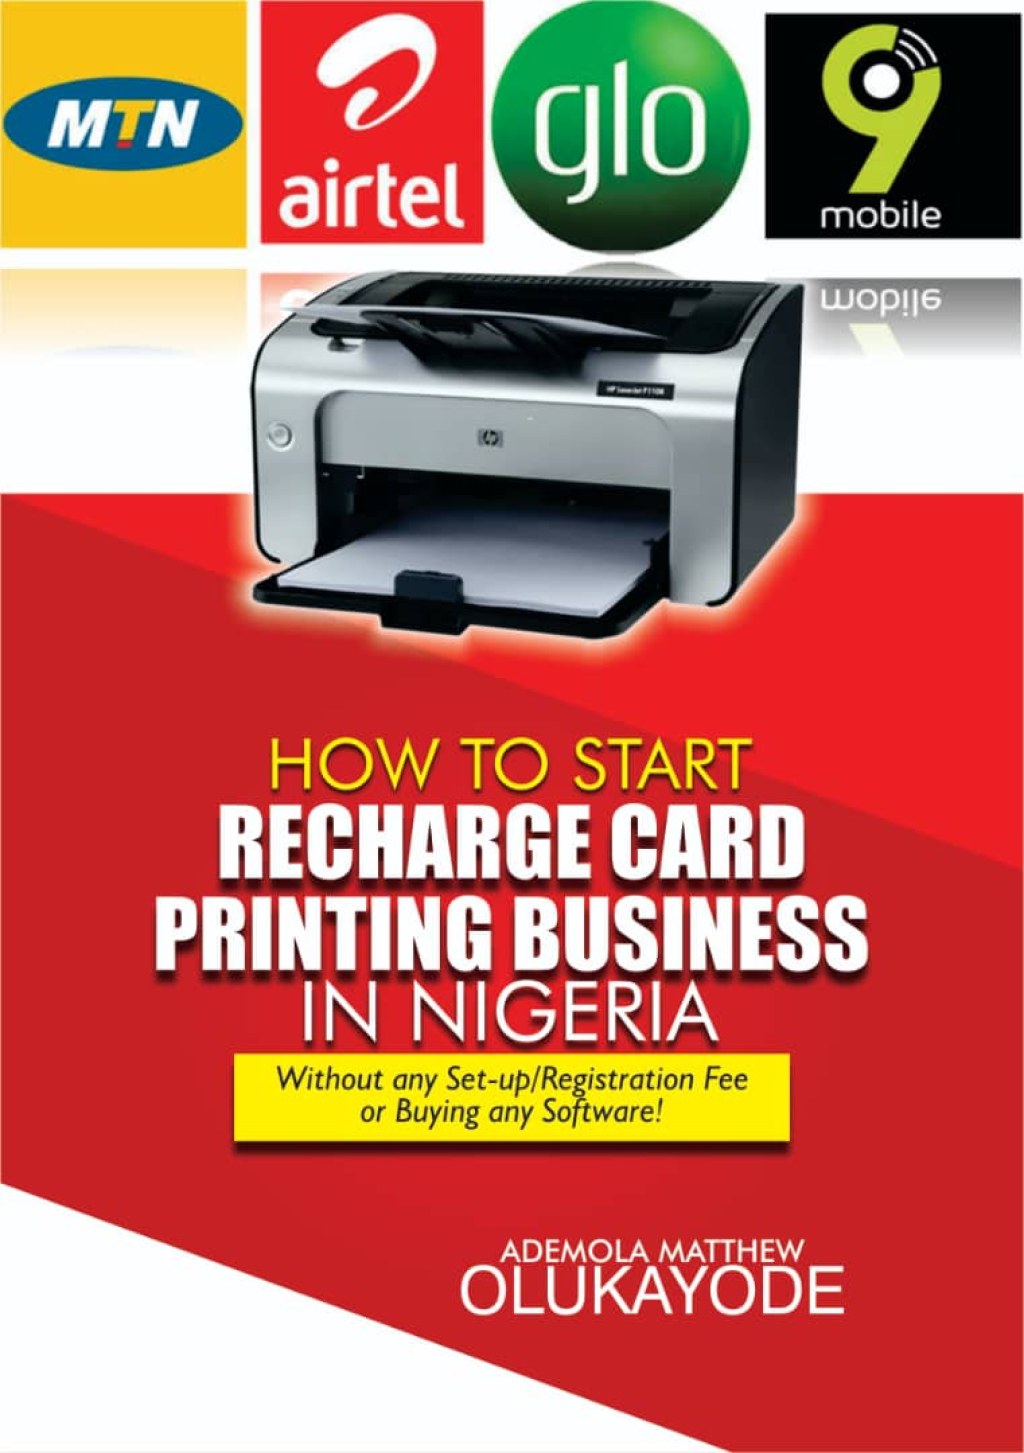 recharge card printing business 2022 - Buy HOW TO START RECHARGE CARD PRINTING BUSINESS IN NIGERIA by